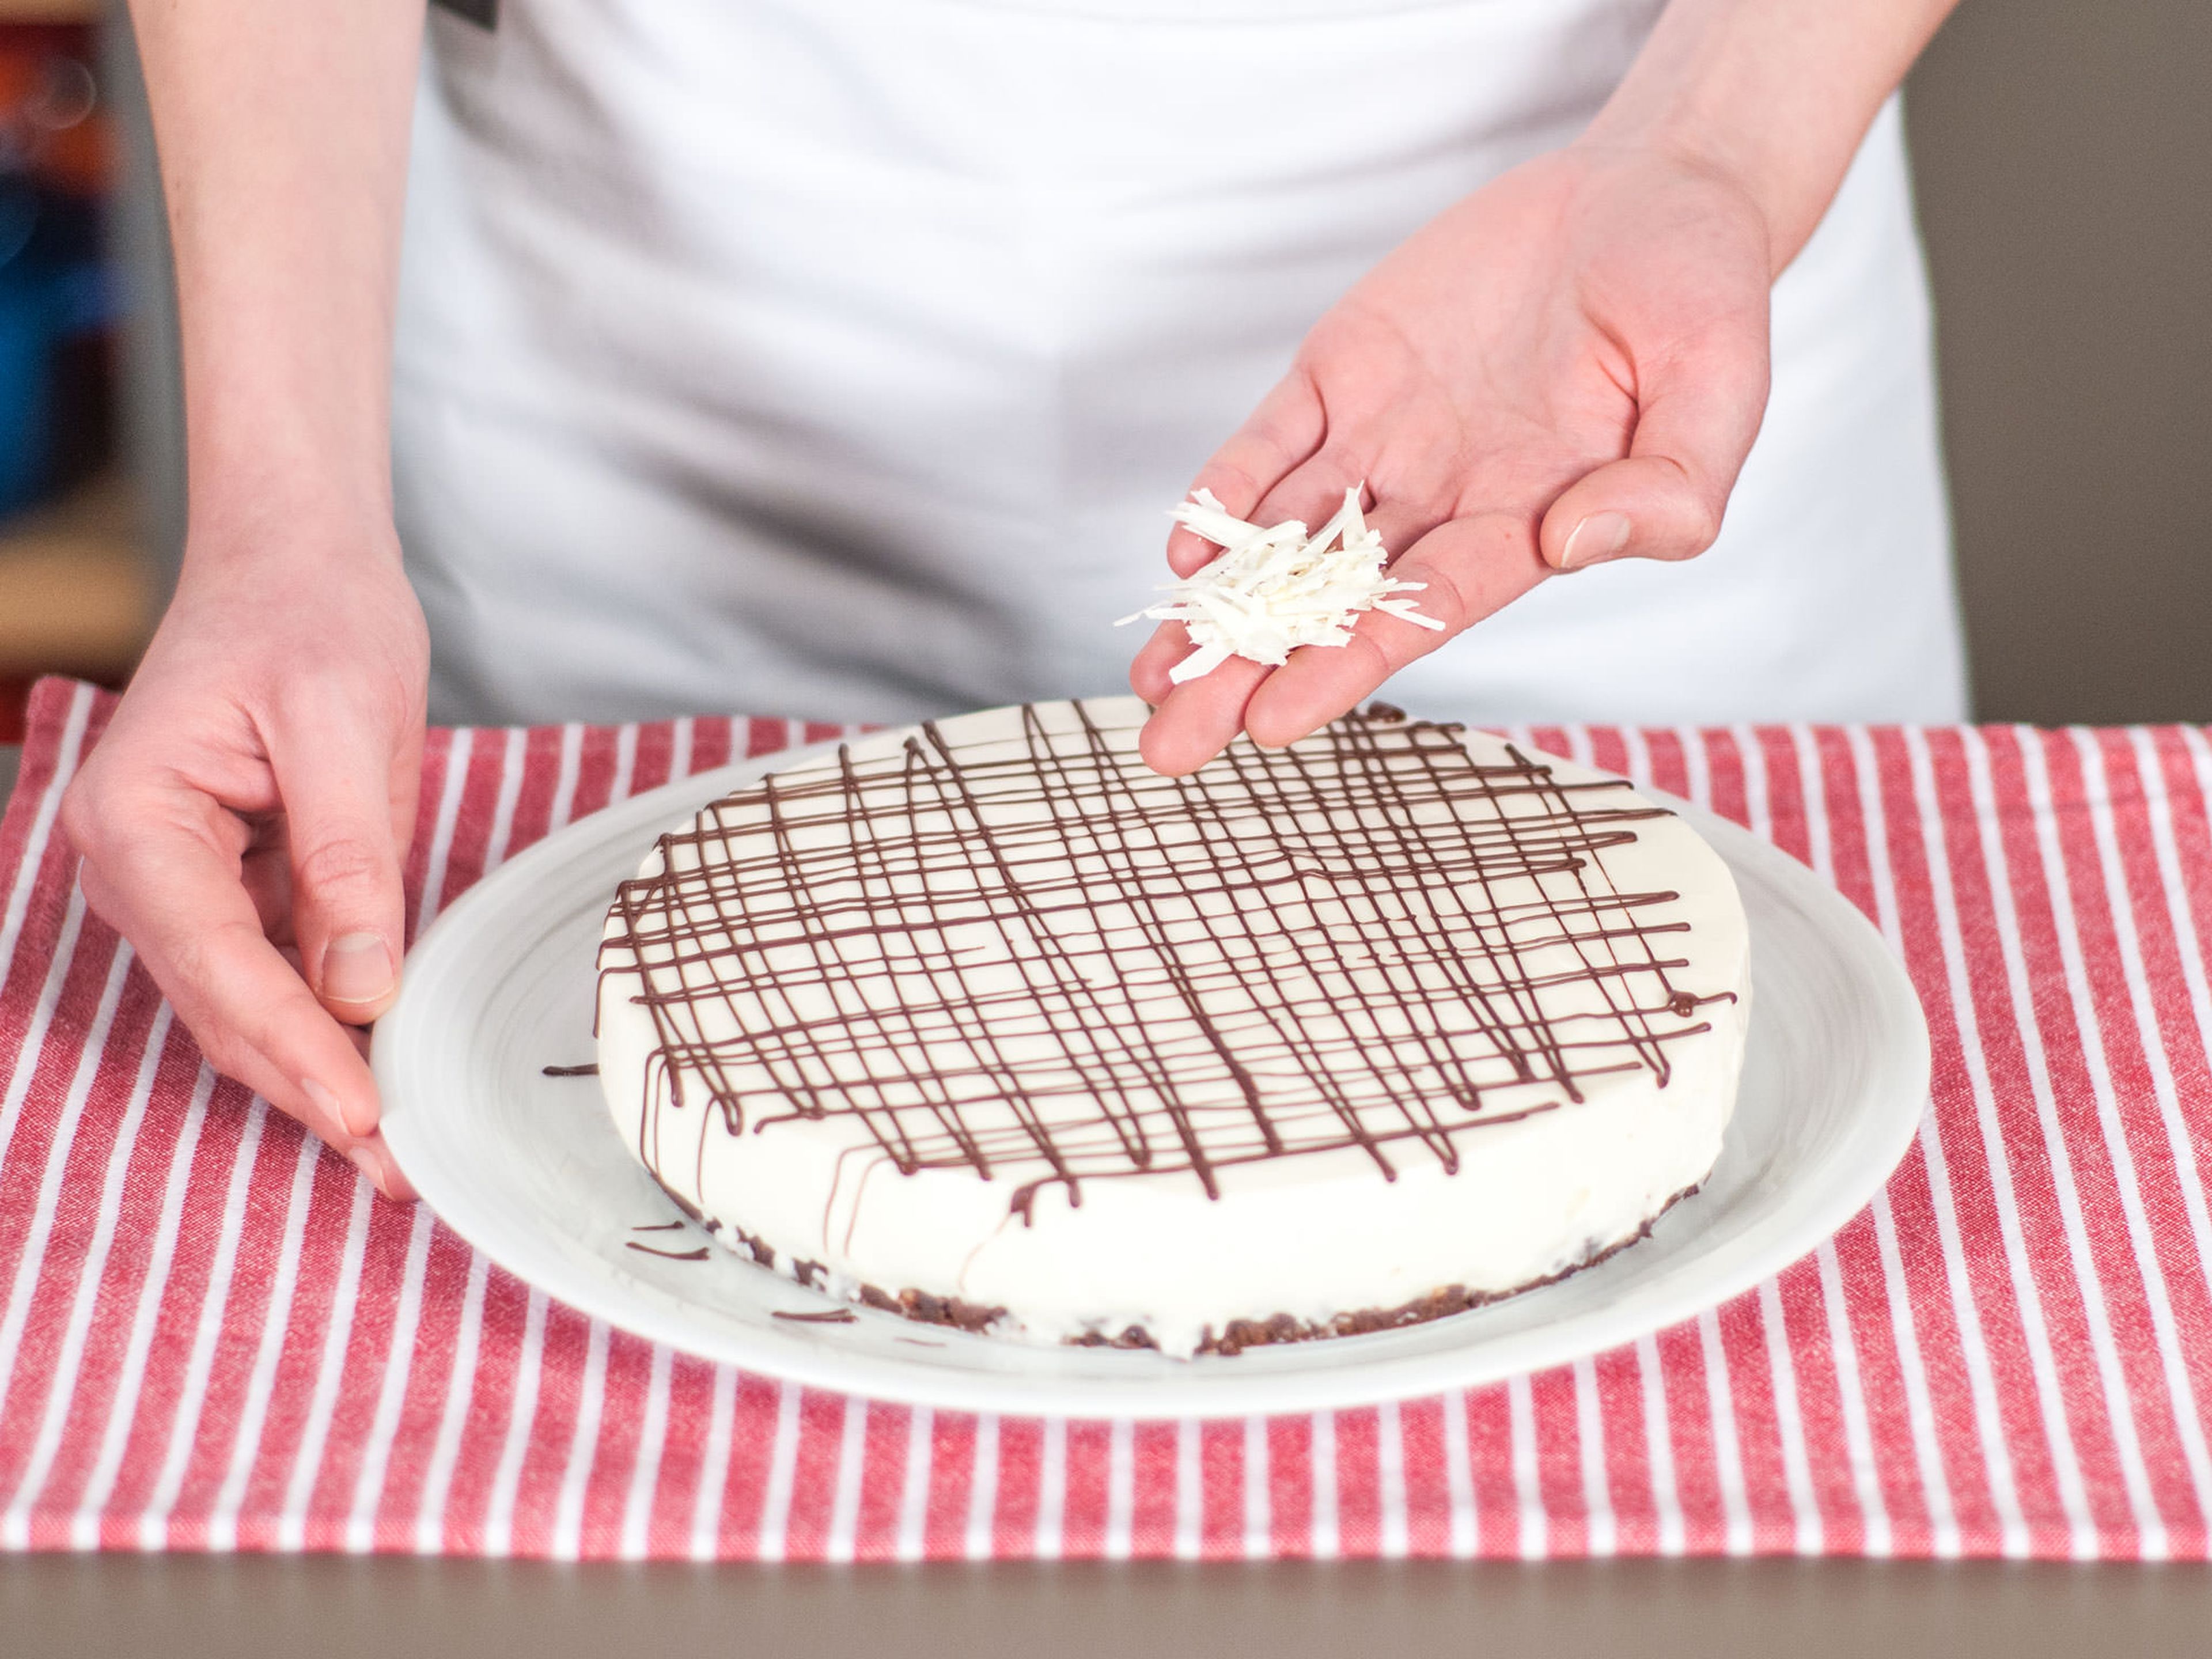 Before serving, decorate the cake with the melted bittersweet chocolate and grated white chocolate. Enjoy with a cup of coffee or tea!